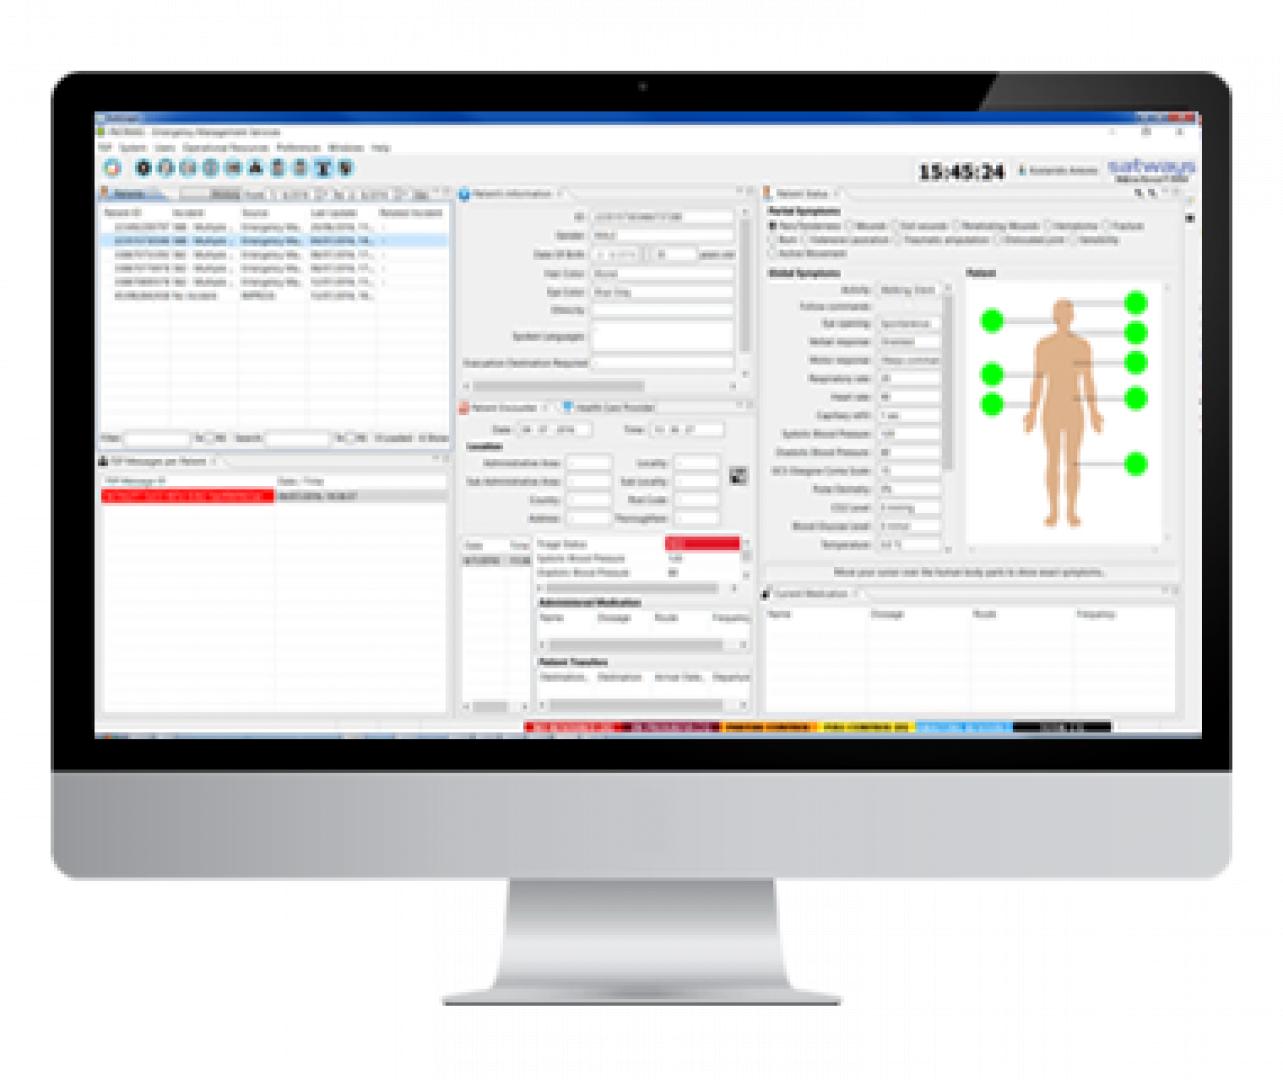 ENGAGE - Tracking of Patients